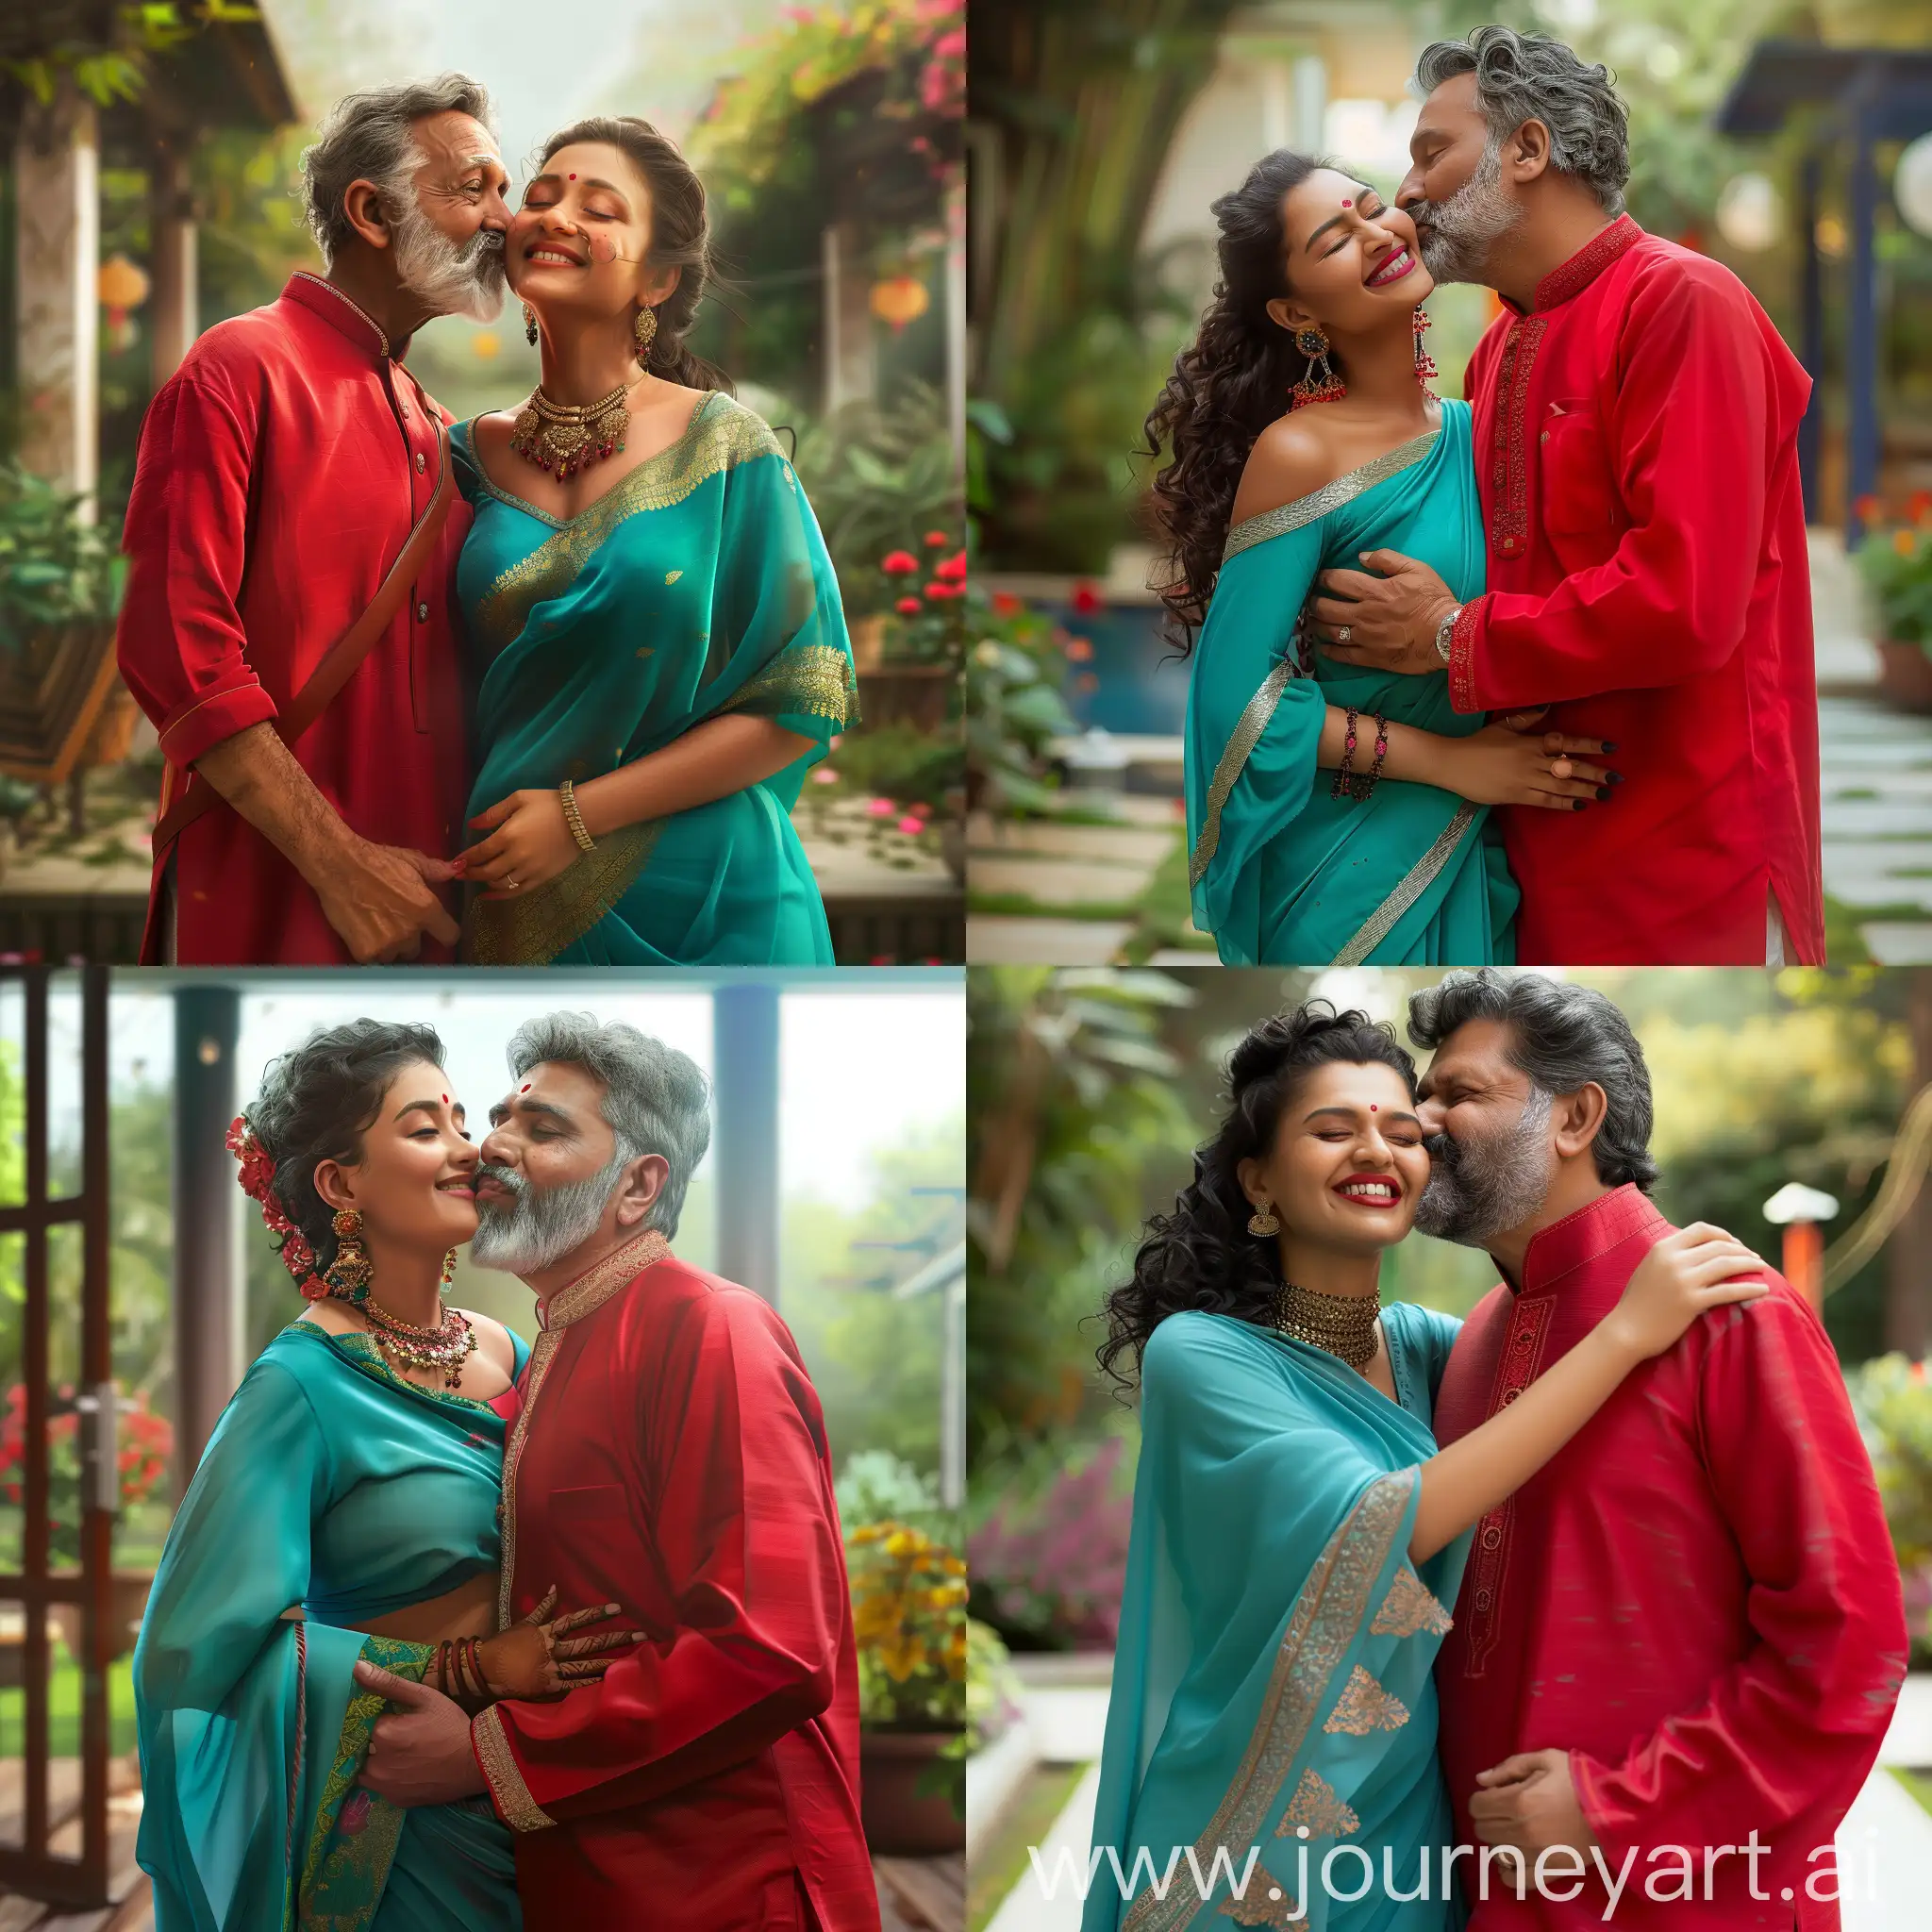 Indian-Couple-Embracing-Affectionately-in-Home-Garden-Setting